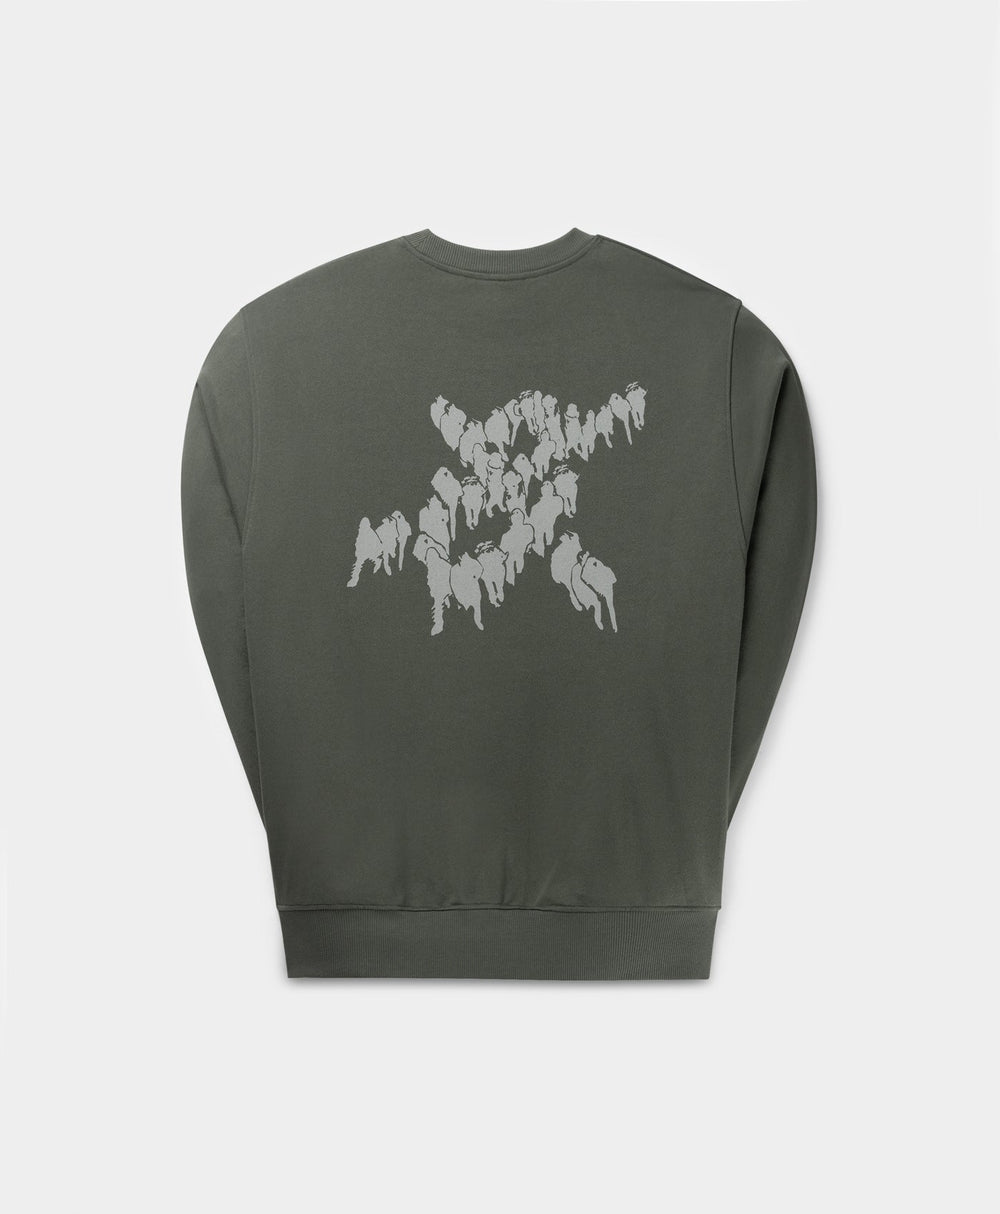 DP - Chimera Green Shield Crowd Relaxed Sweater - Packshot - Front